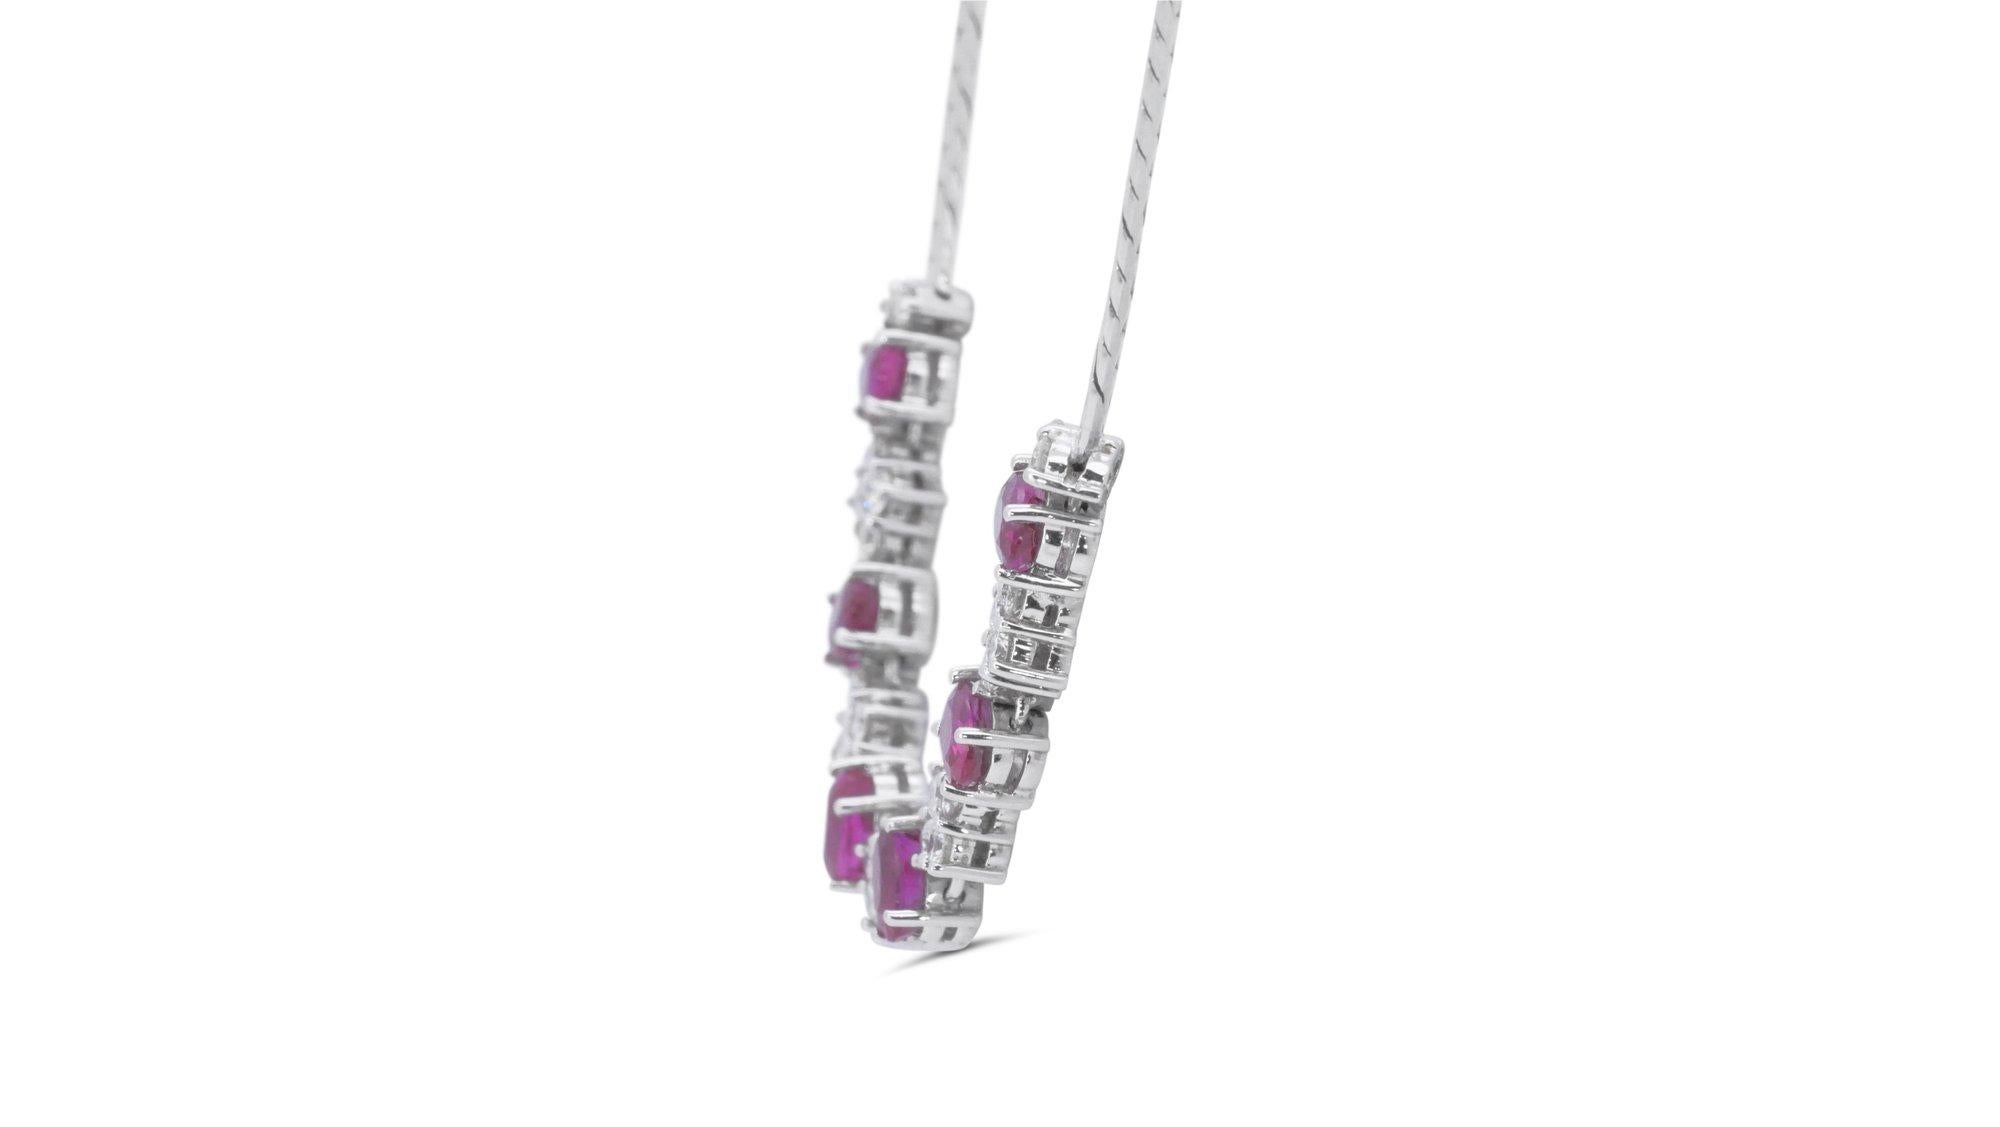 Dazzling 18k White Gold Necklace w/ 2.85ct Rubies and Natural Diamonds IGI Cert 1